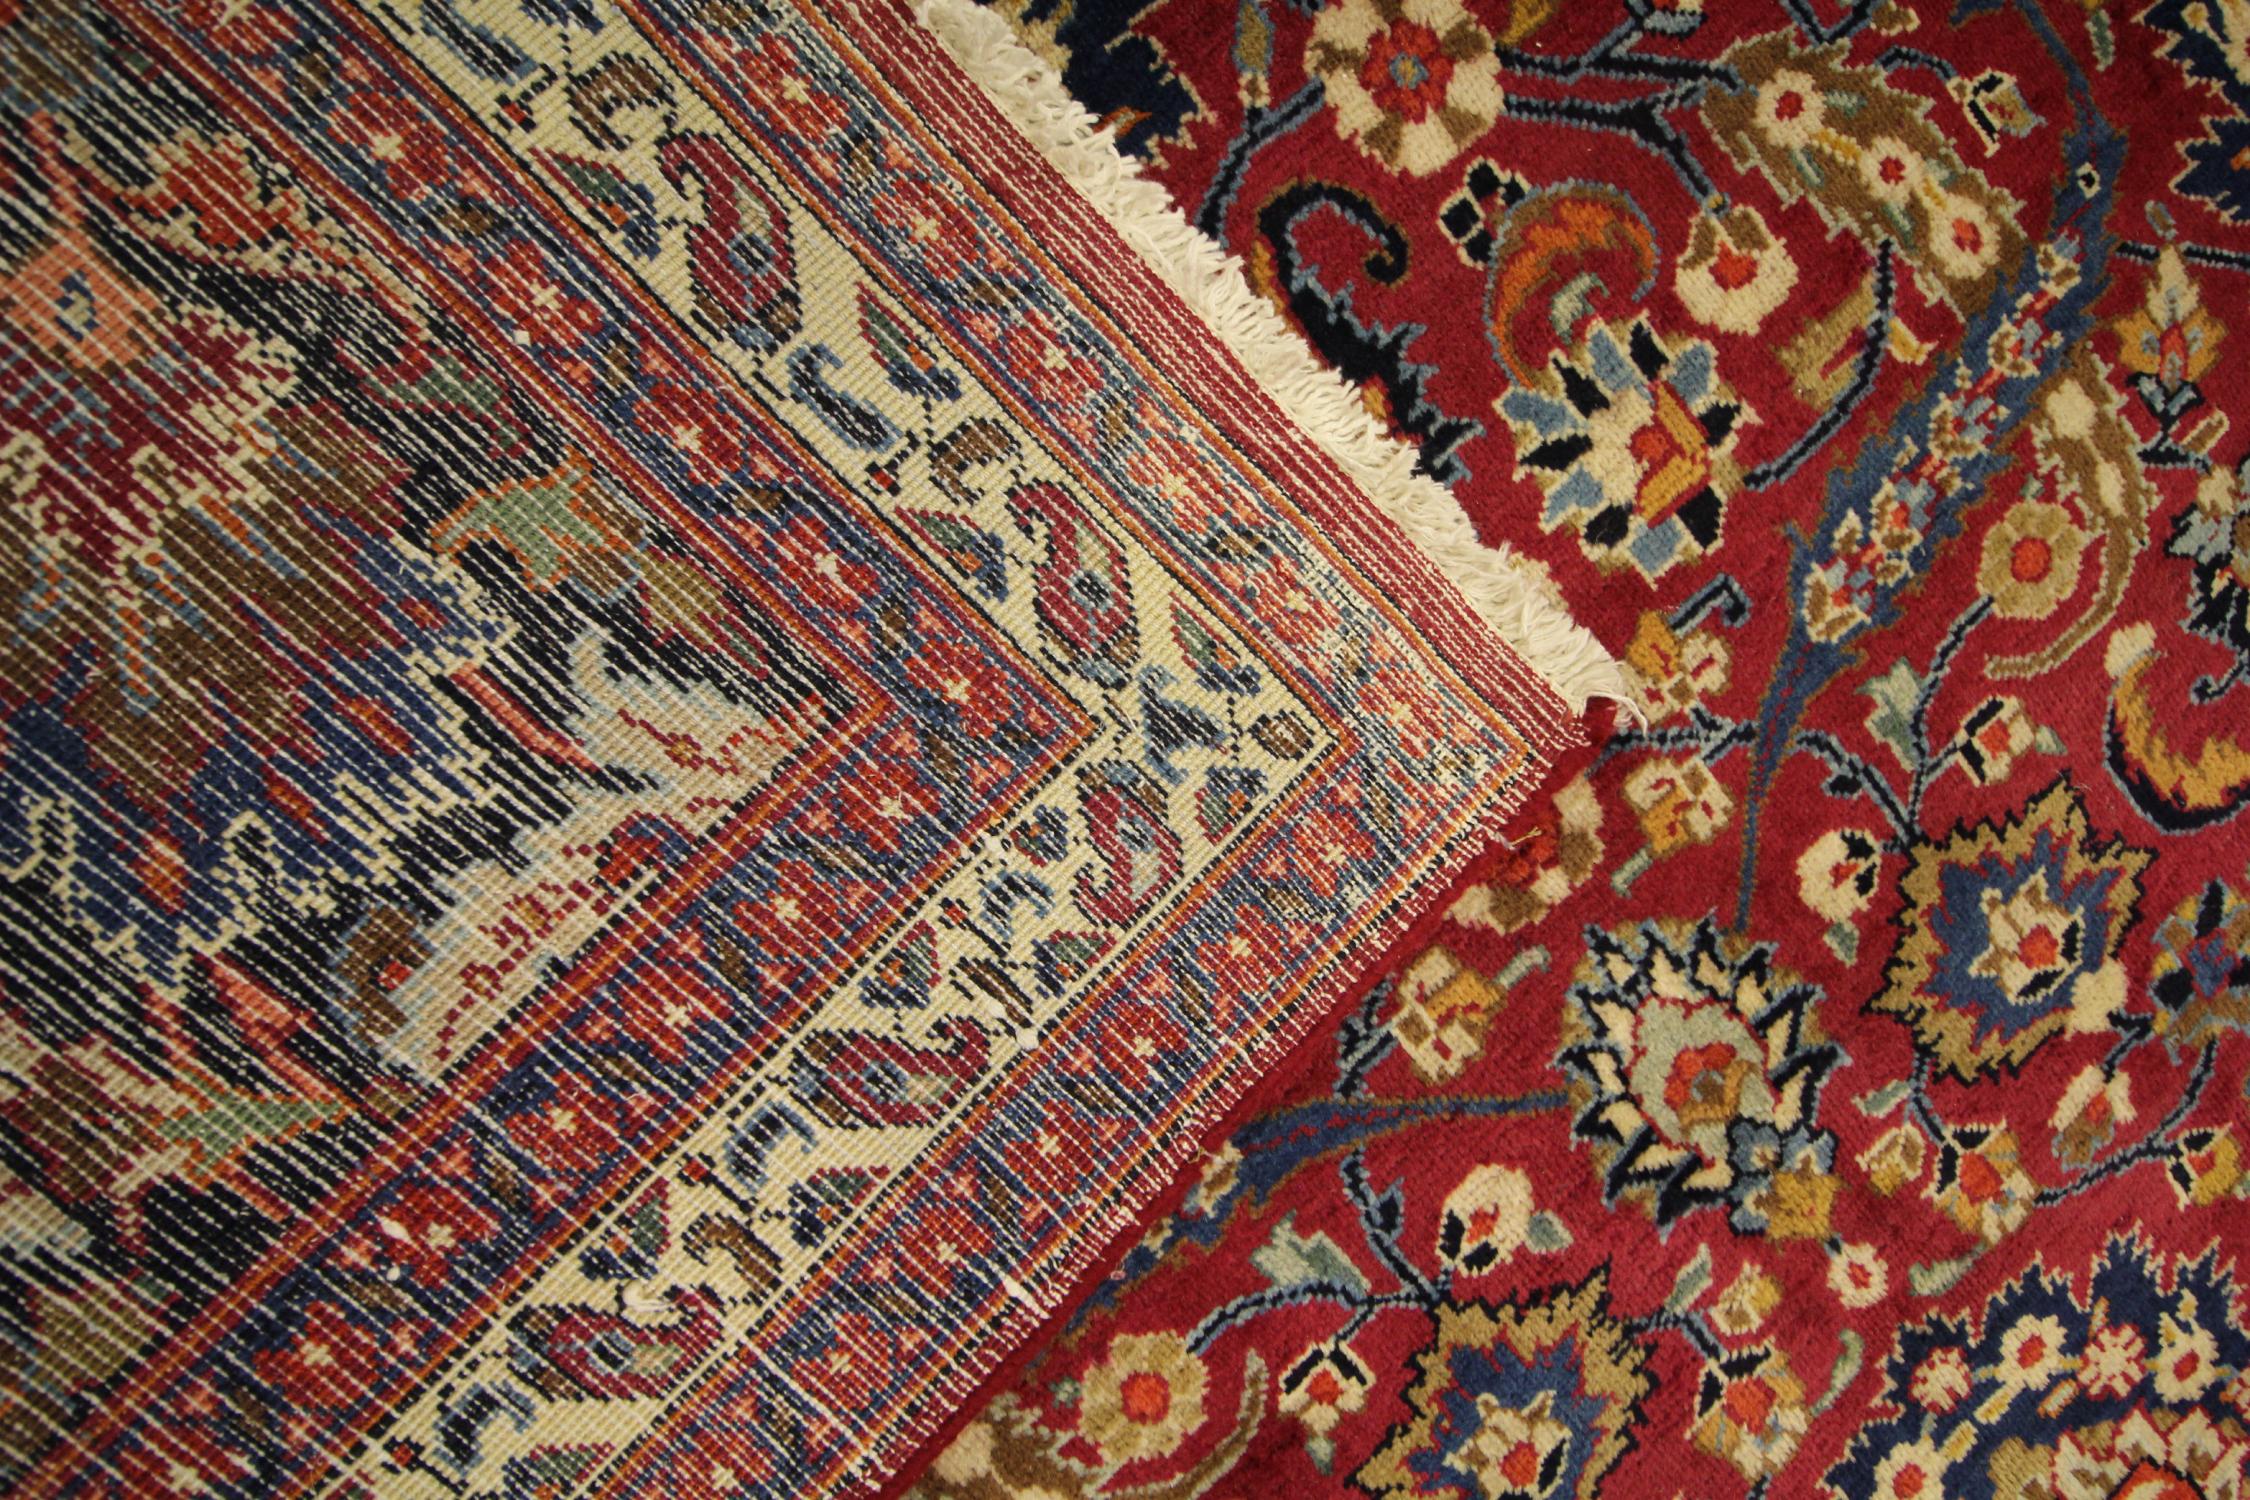 Antique Rugs Crimson Red Handmade Carpet, All over Turkish Rugs for Sale For Sale 2